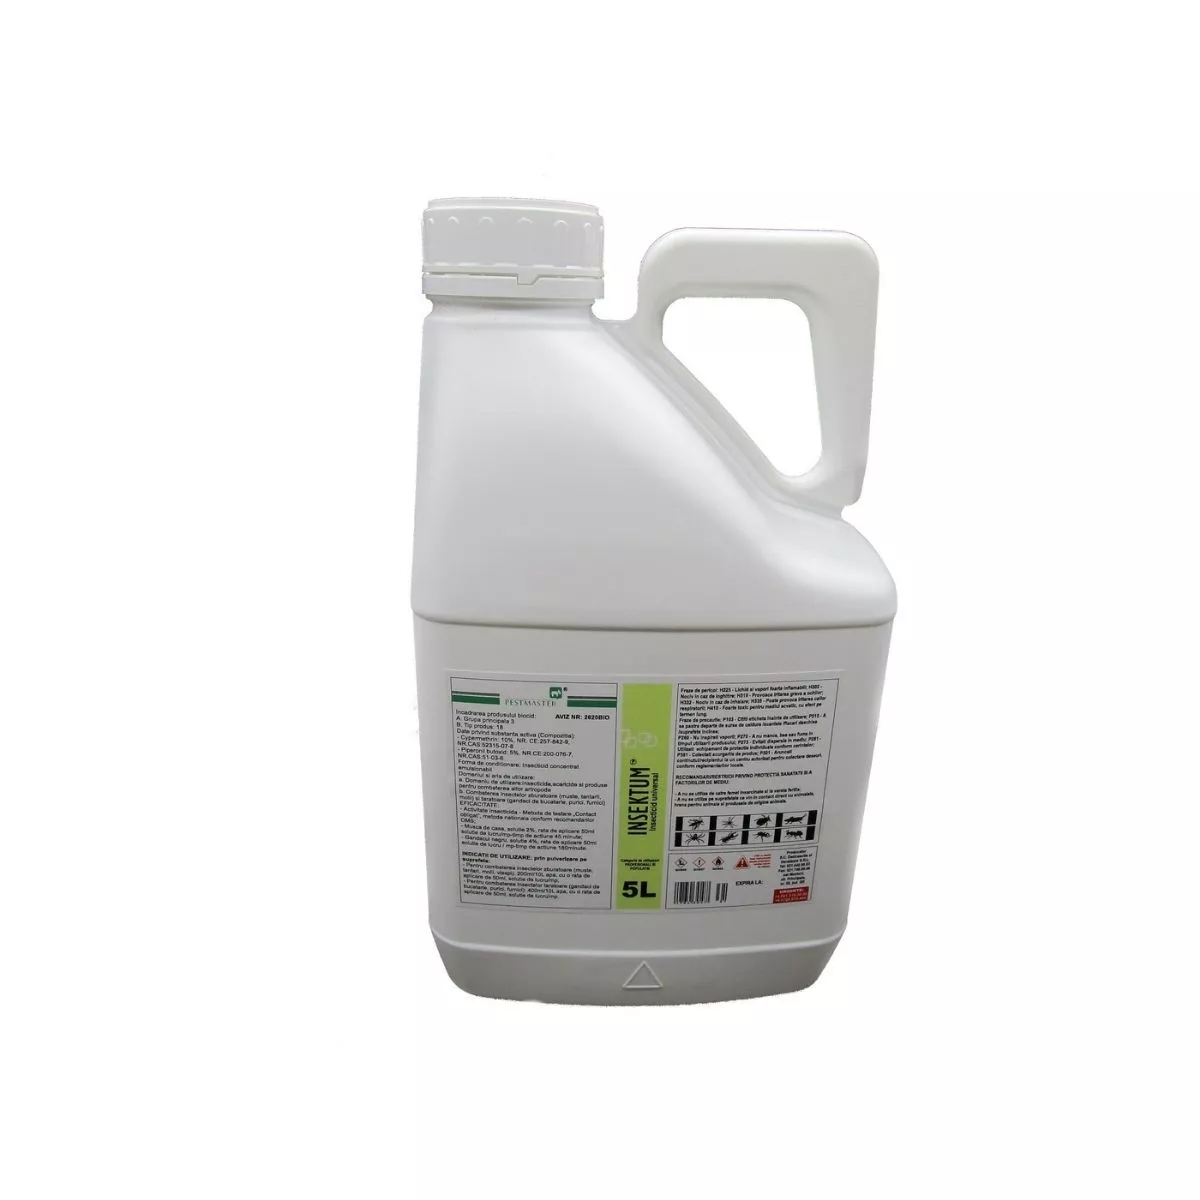 Insecticid concentrat INSEKTUM 5 L ,Pestmaster 1